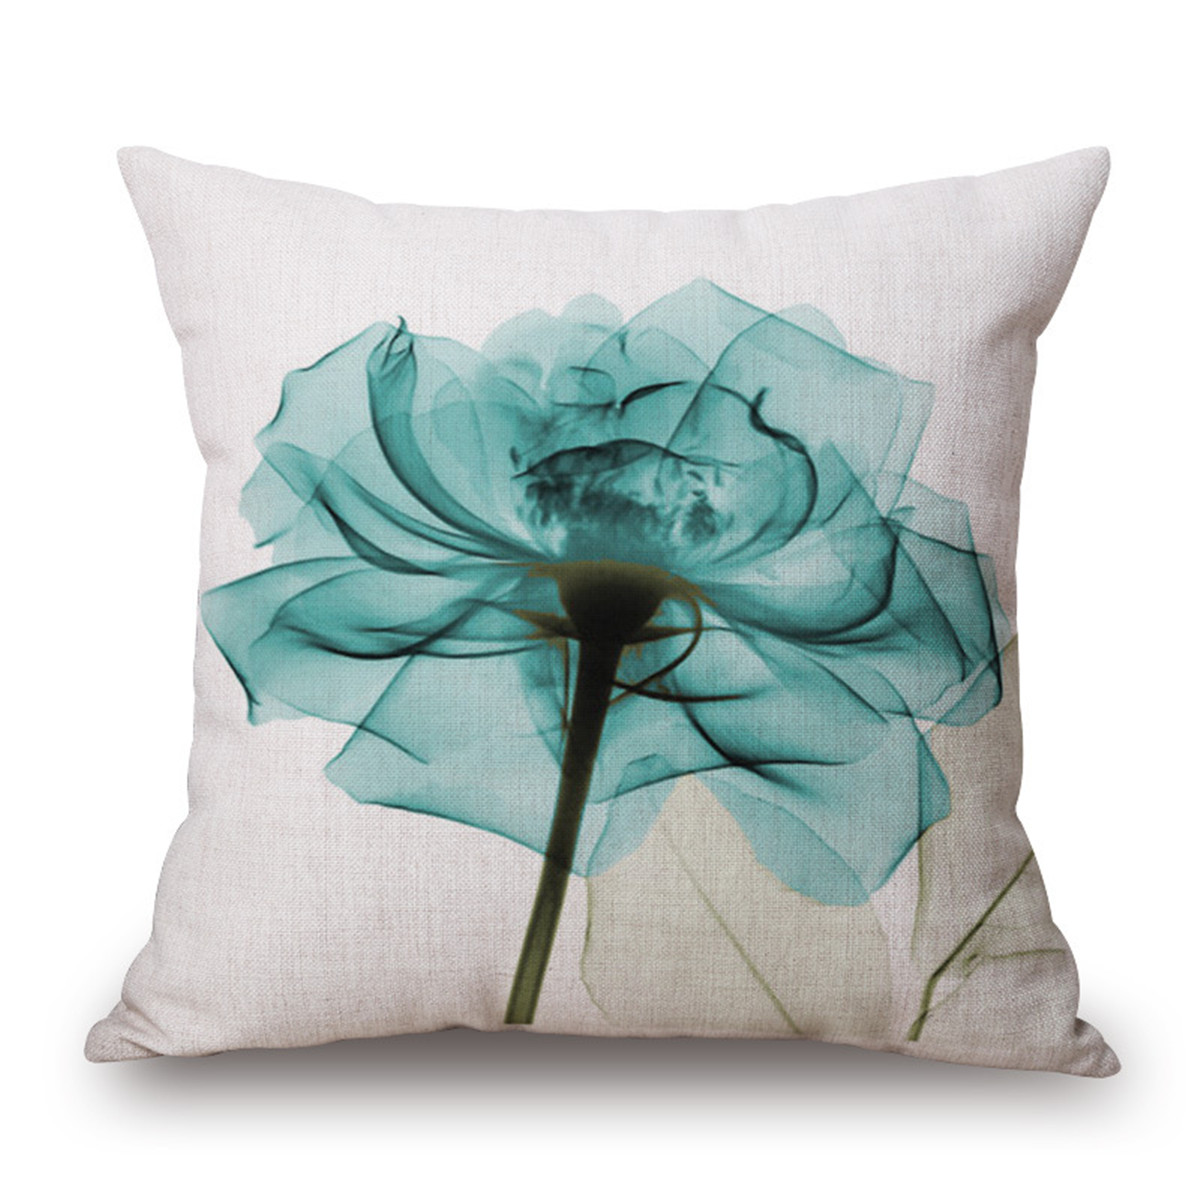 Ink-Painting-Flowers-Cotton-Linen-Pillow-Case-Tulips-Sofa-Cushion-Cover-45x45cm-1161674-10